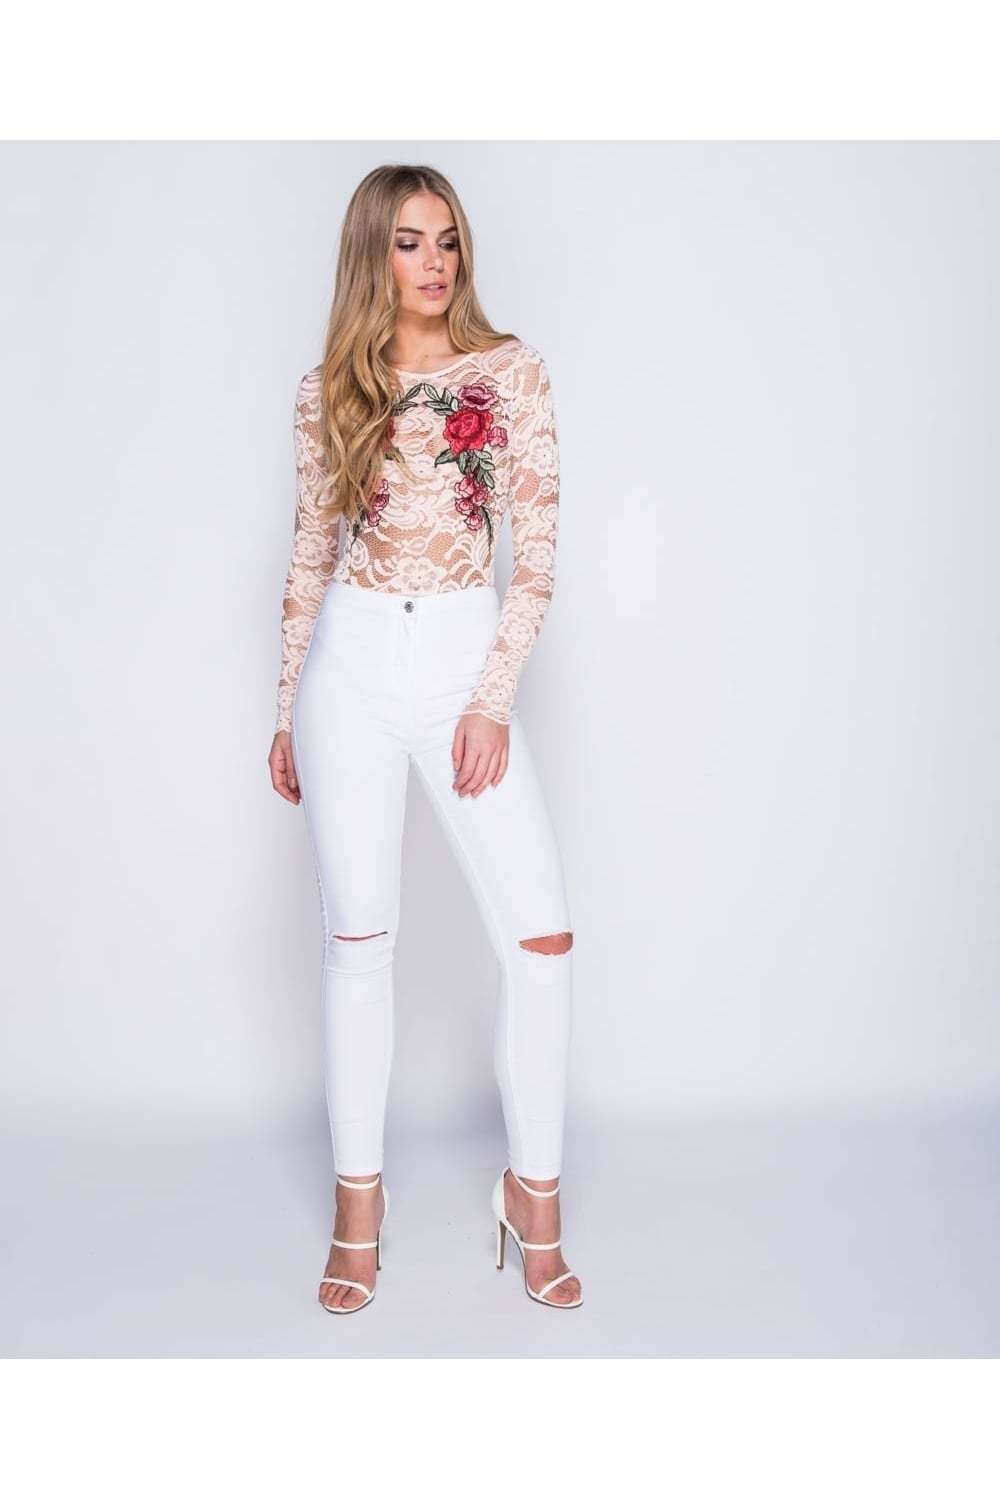 Flower Patch Embroidered Lace Long Sleeve Bodysuit – LuvForever